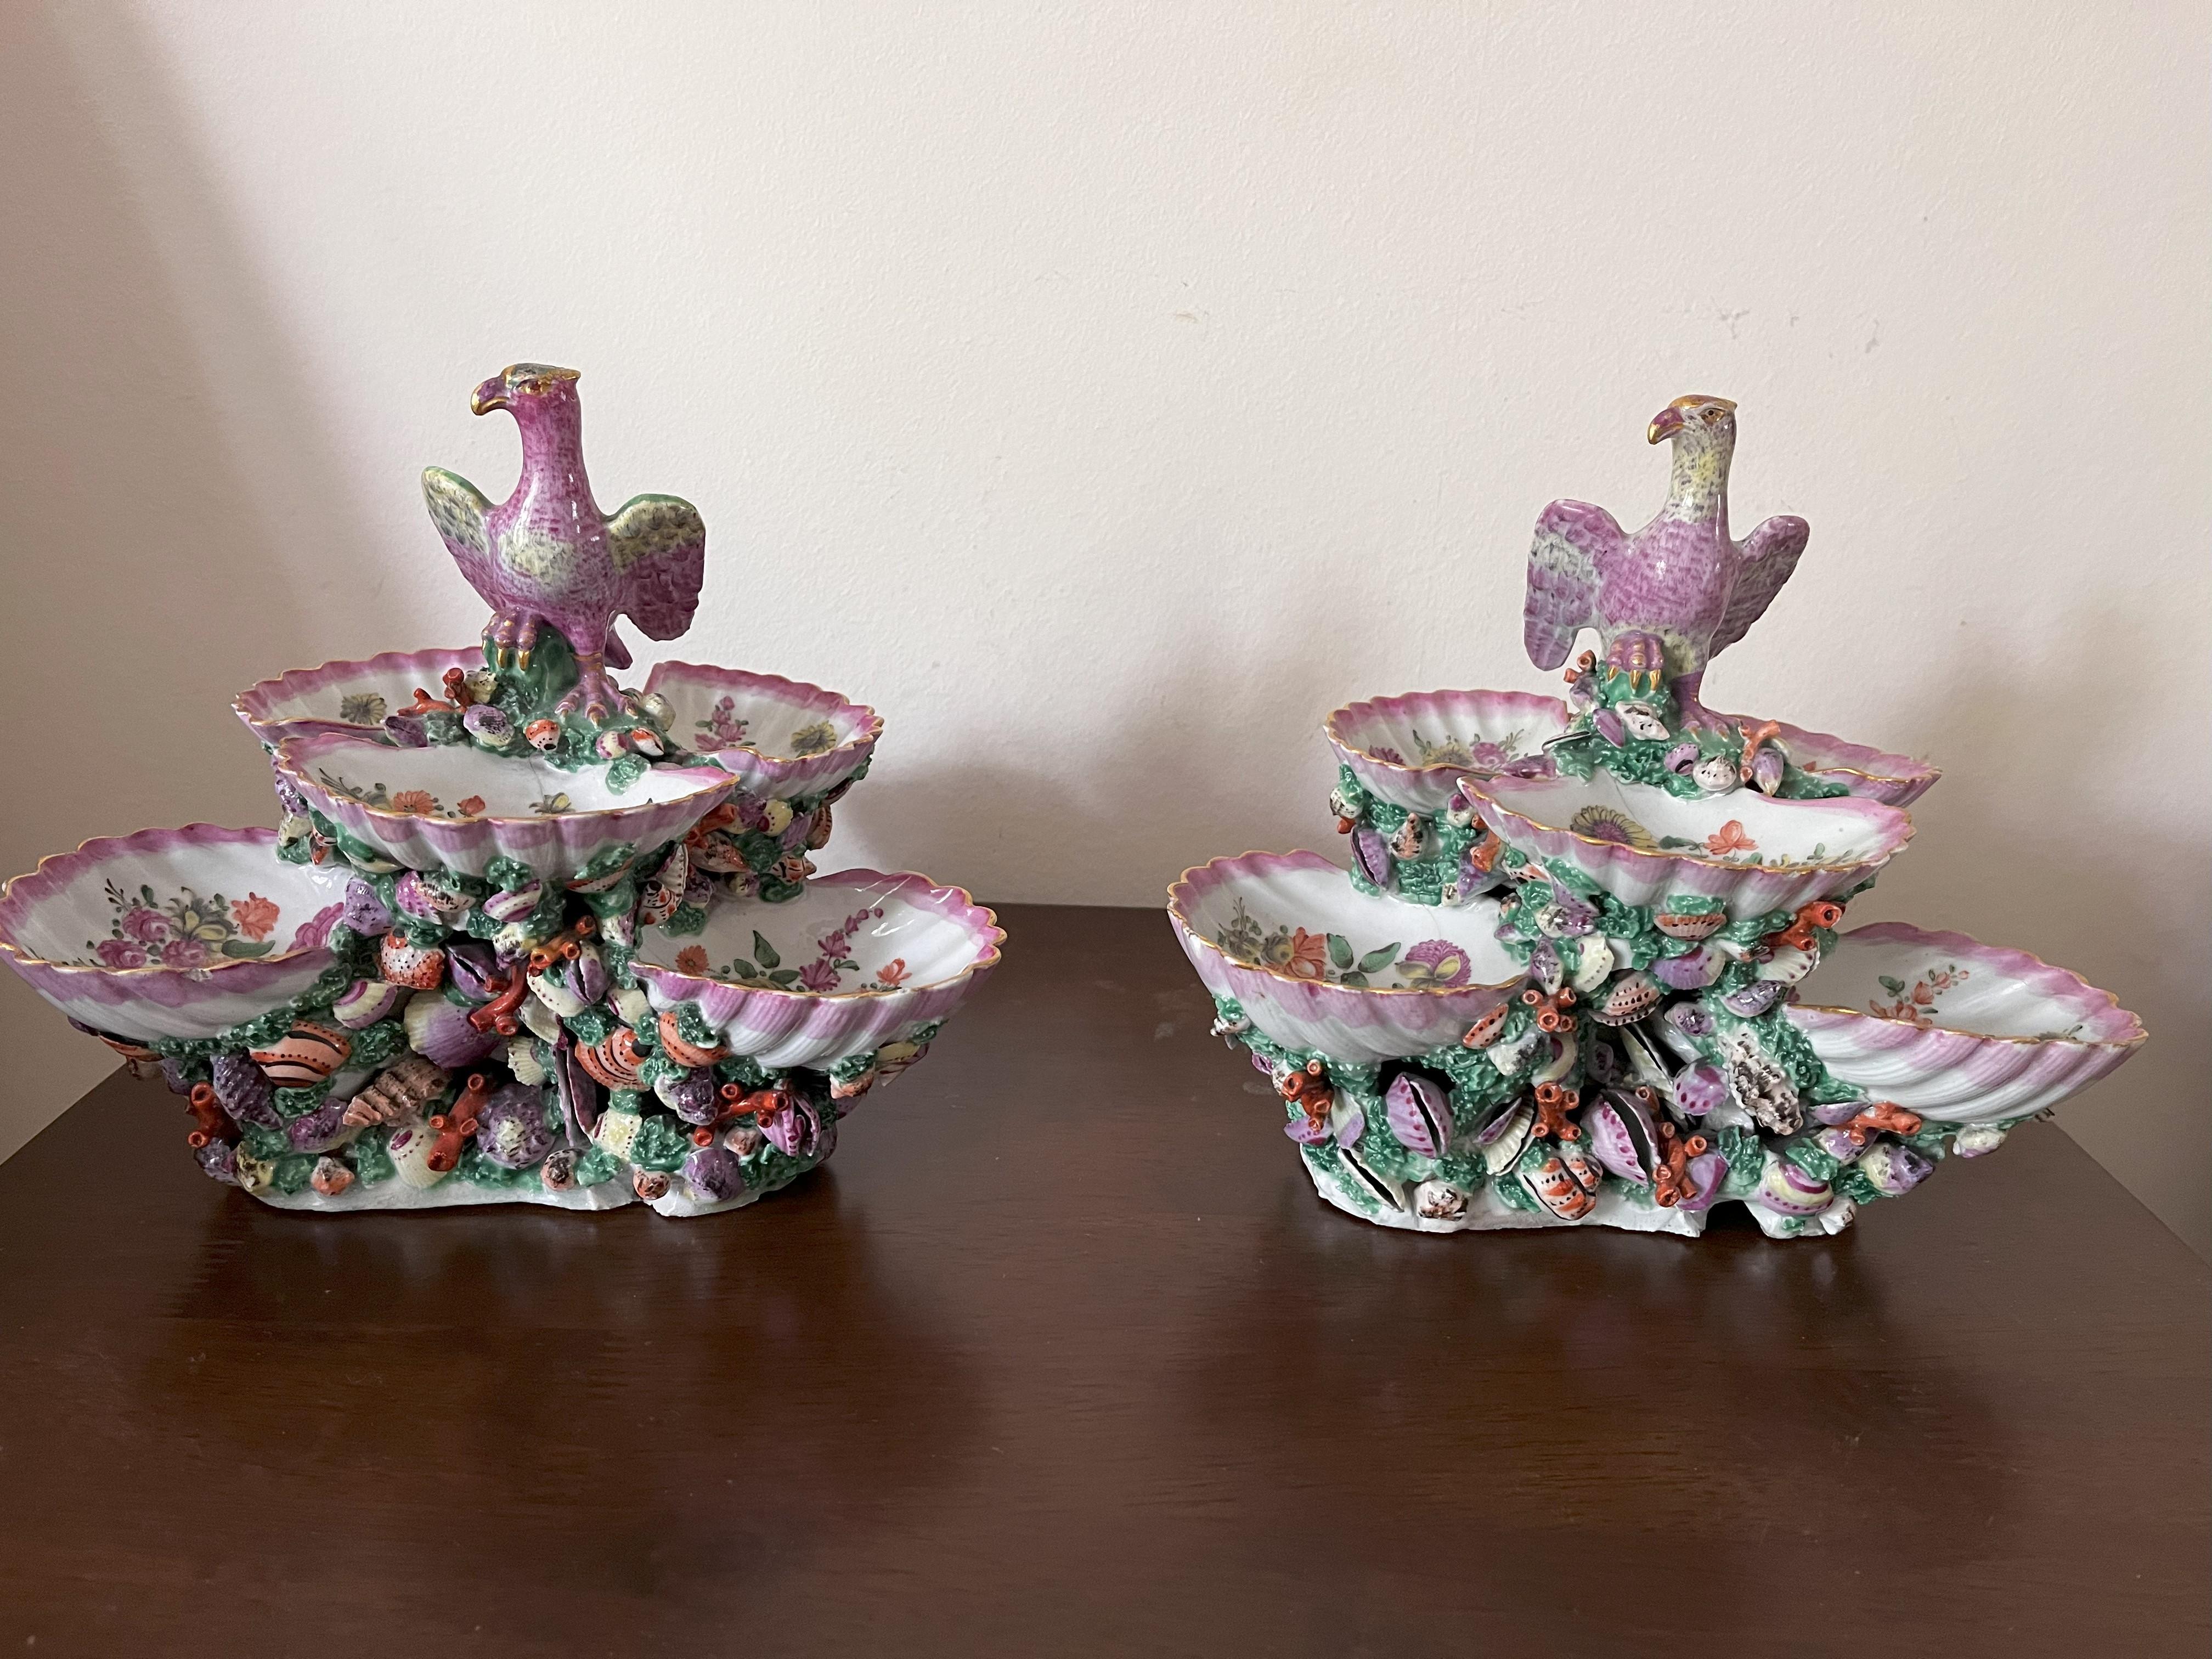 A pair 18th Century Worcester Porcelain Shell Centrepieces, circa 1770, each modelled as six shells on a base of smaller shells and coral, painted with flower sprays within pink borders, topped with an Eagle with outstretched wings that acts as a